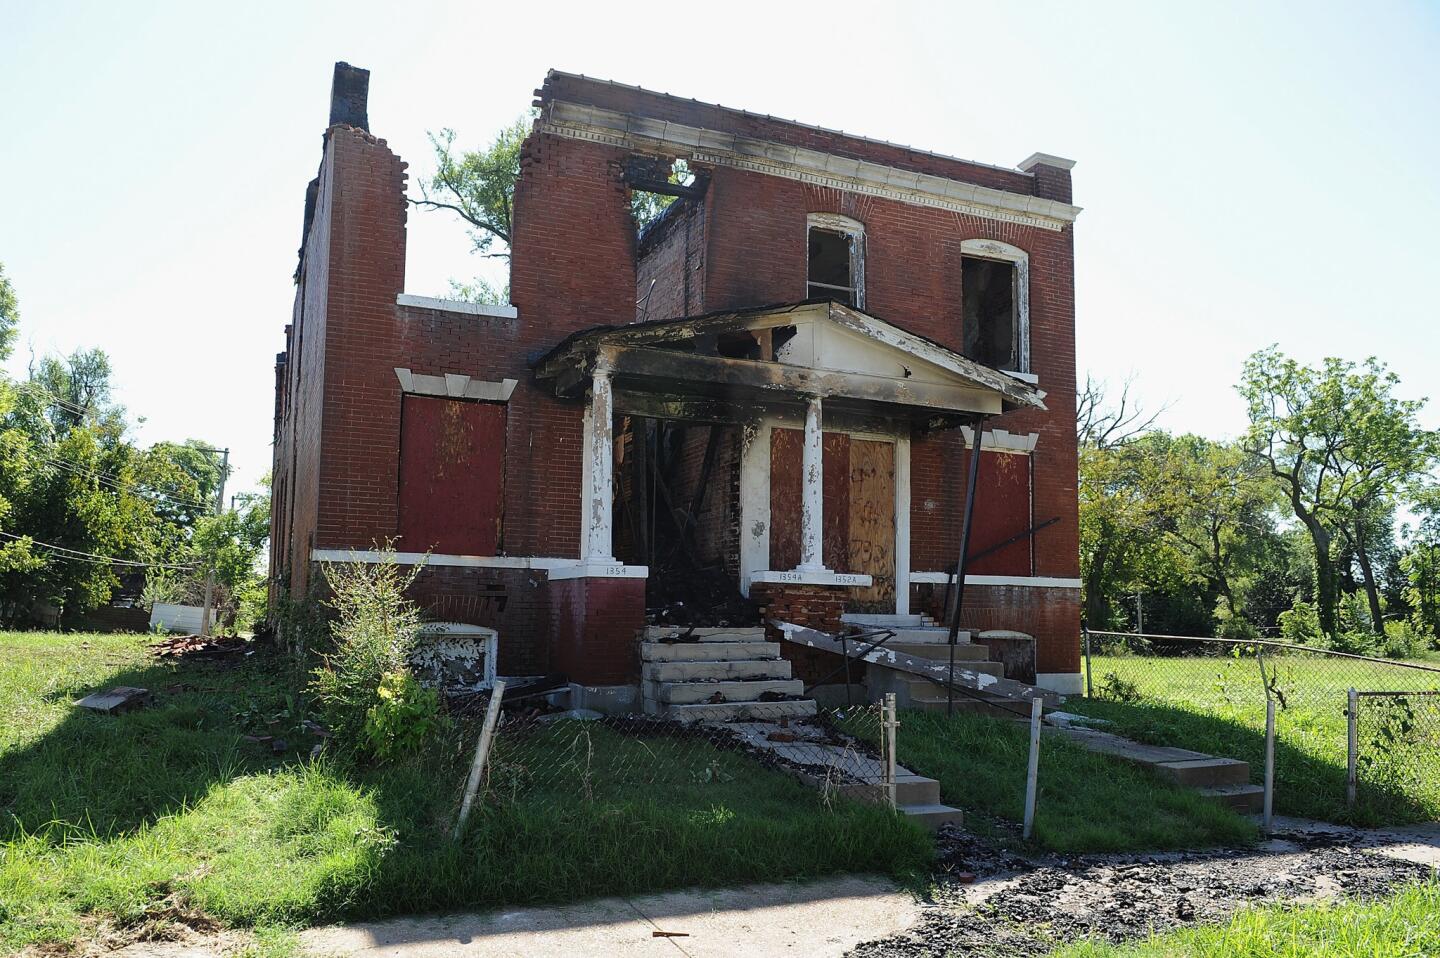 An uninhabited house set ablaze by protesters is seen Aug. 20, 2015, in St. Louis.